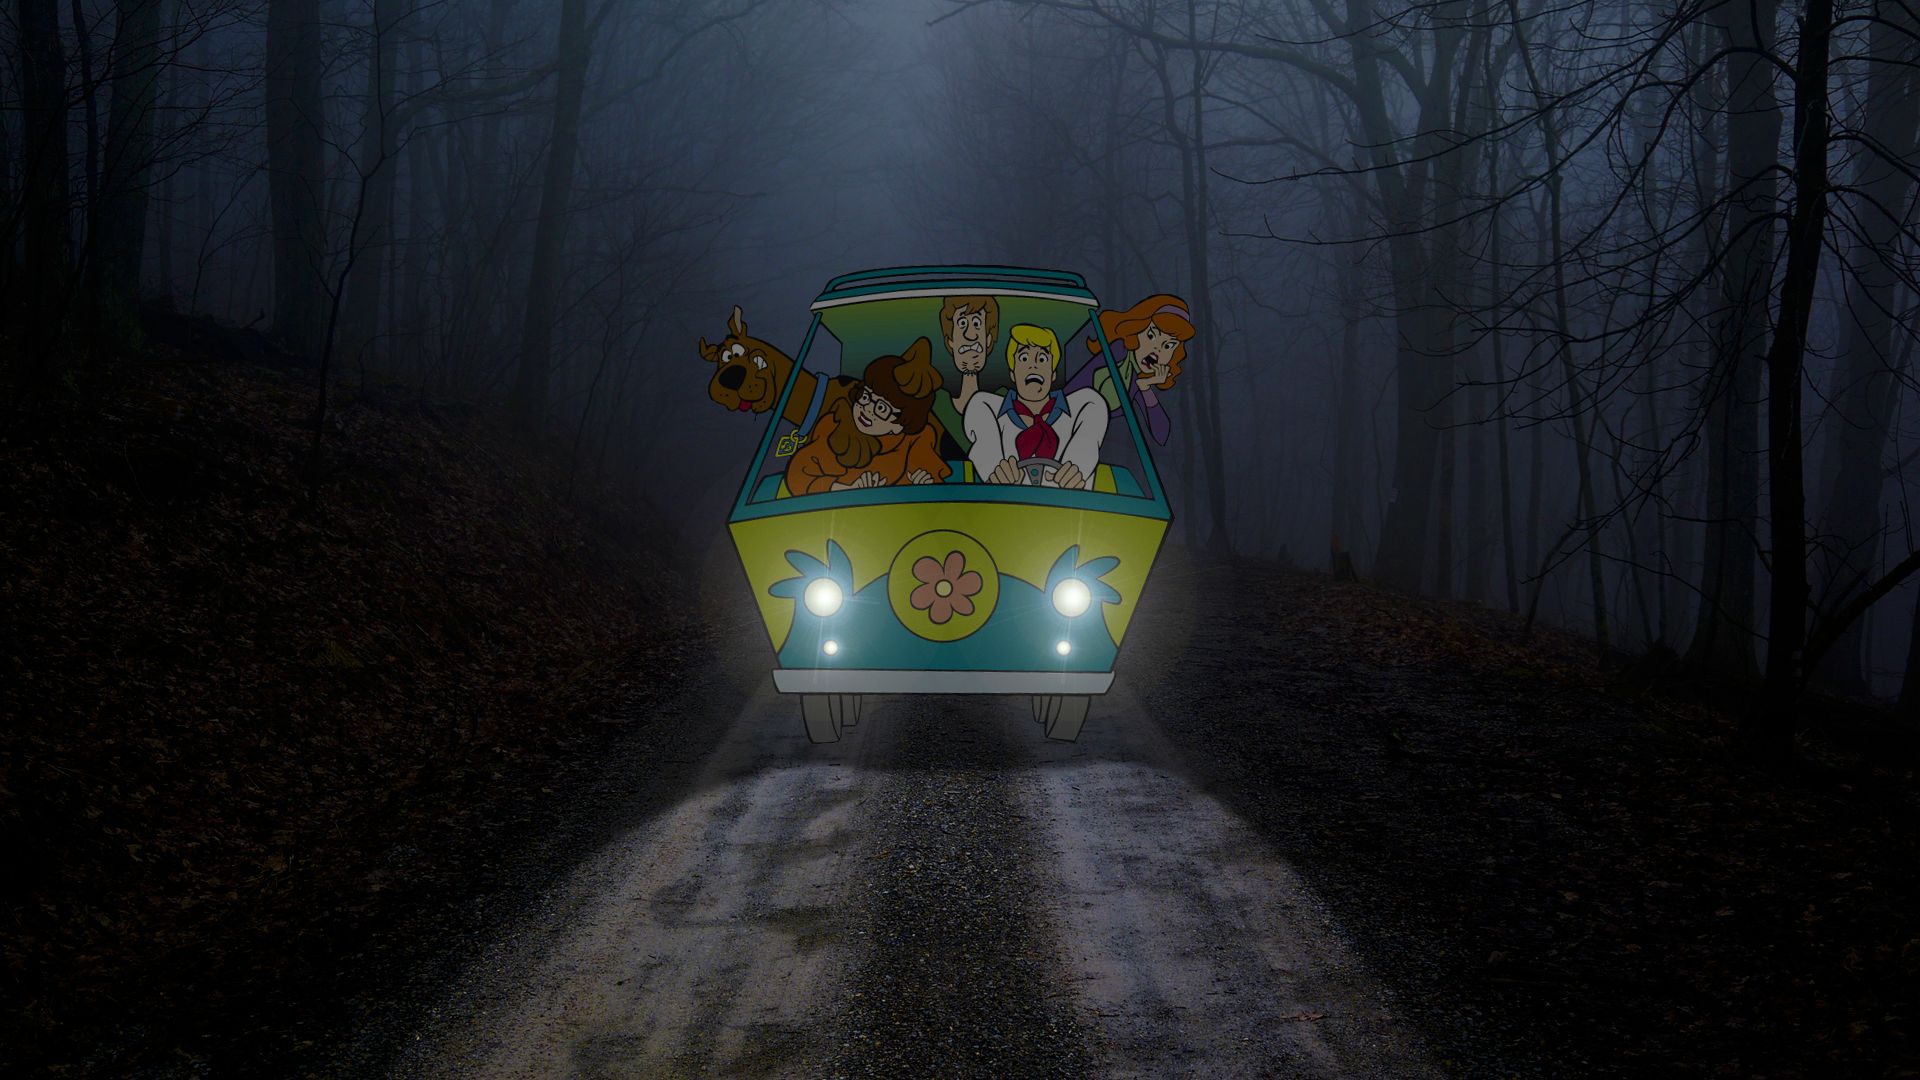 Free download Scooby Doo gang wallpaper Mystery Machine van with Scooby and his [1920x1080] for your Desktop, Mobile & Tablet. Explore John Maller Wallpaper. Justin Maller 4K Wallpaper, Justin